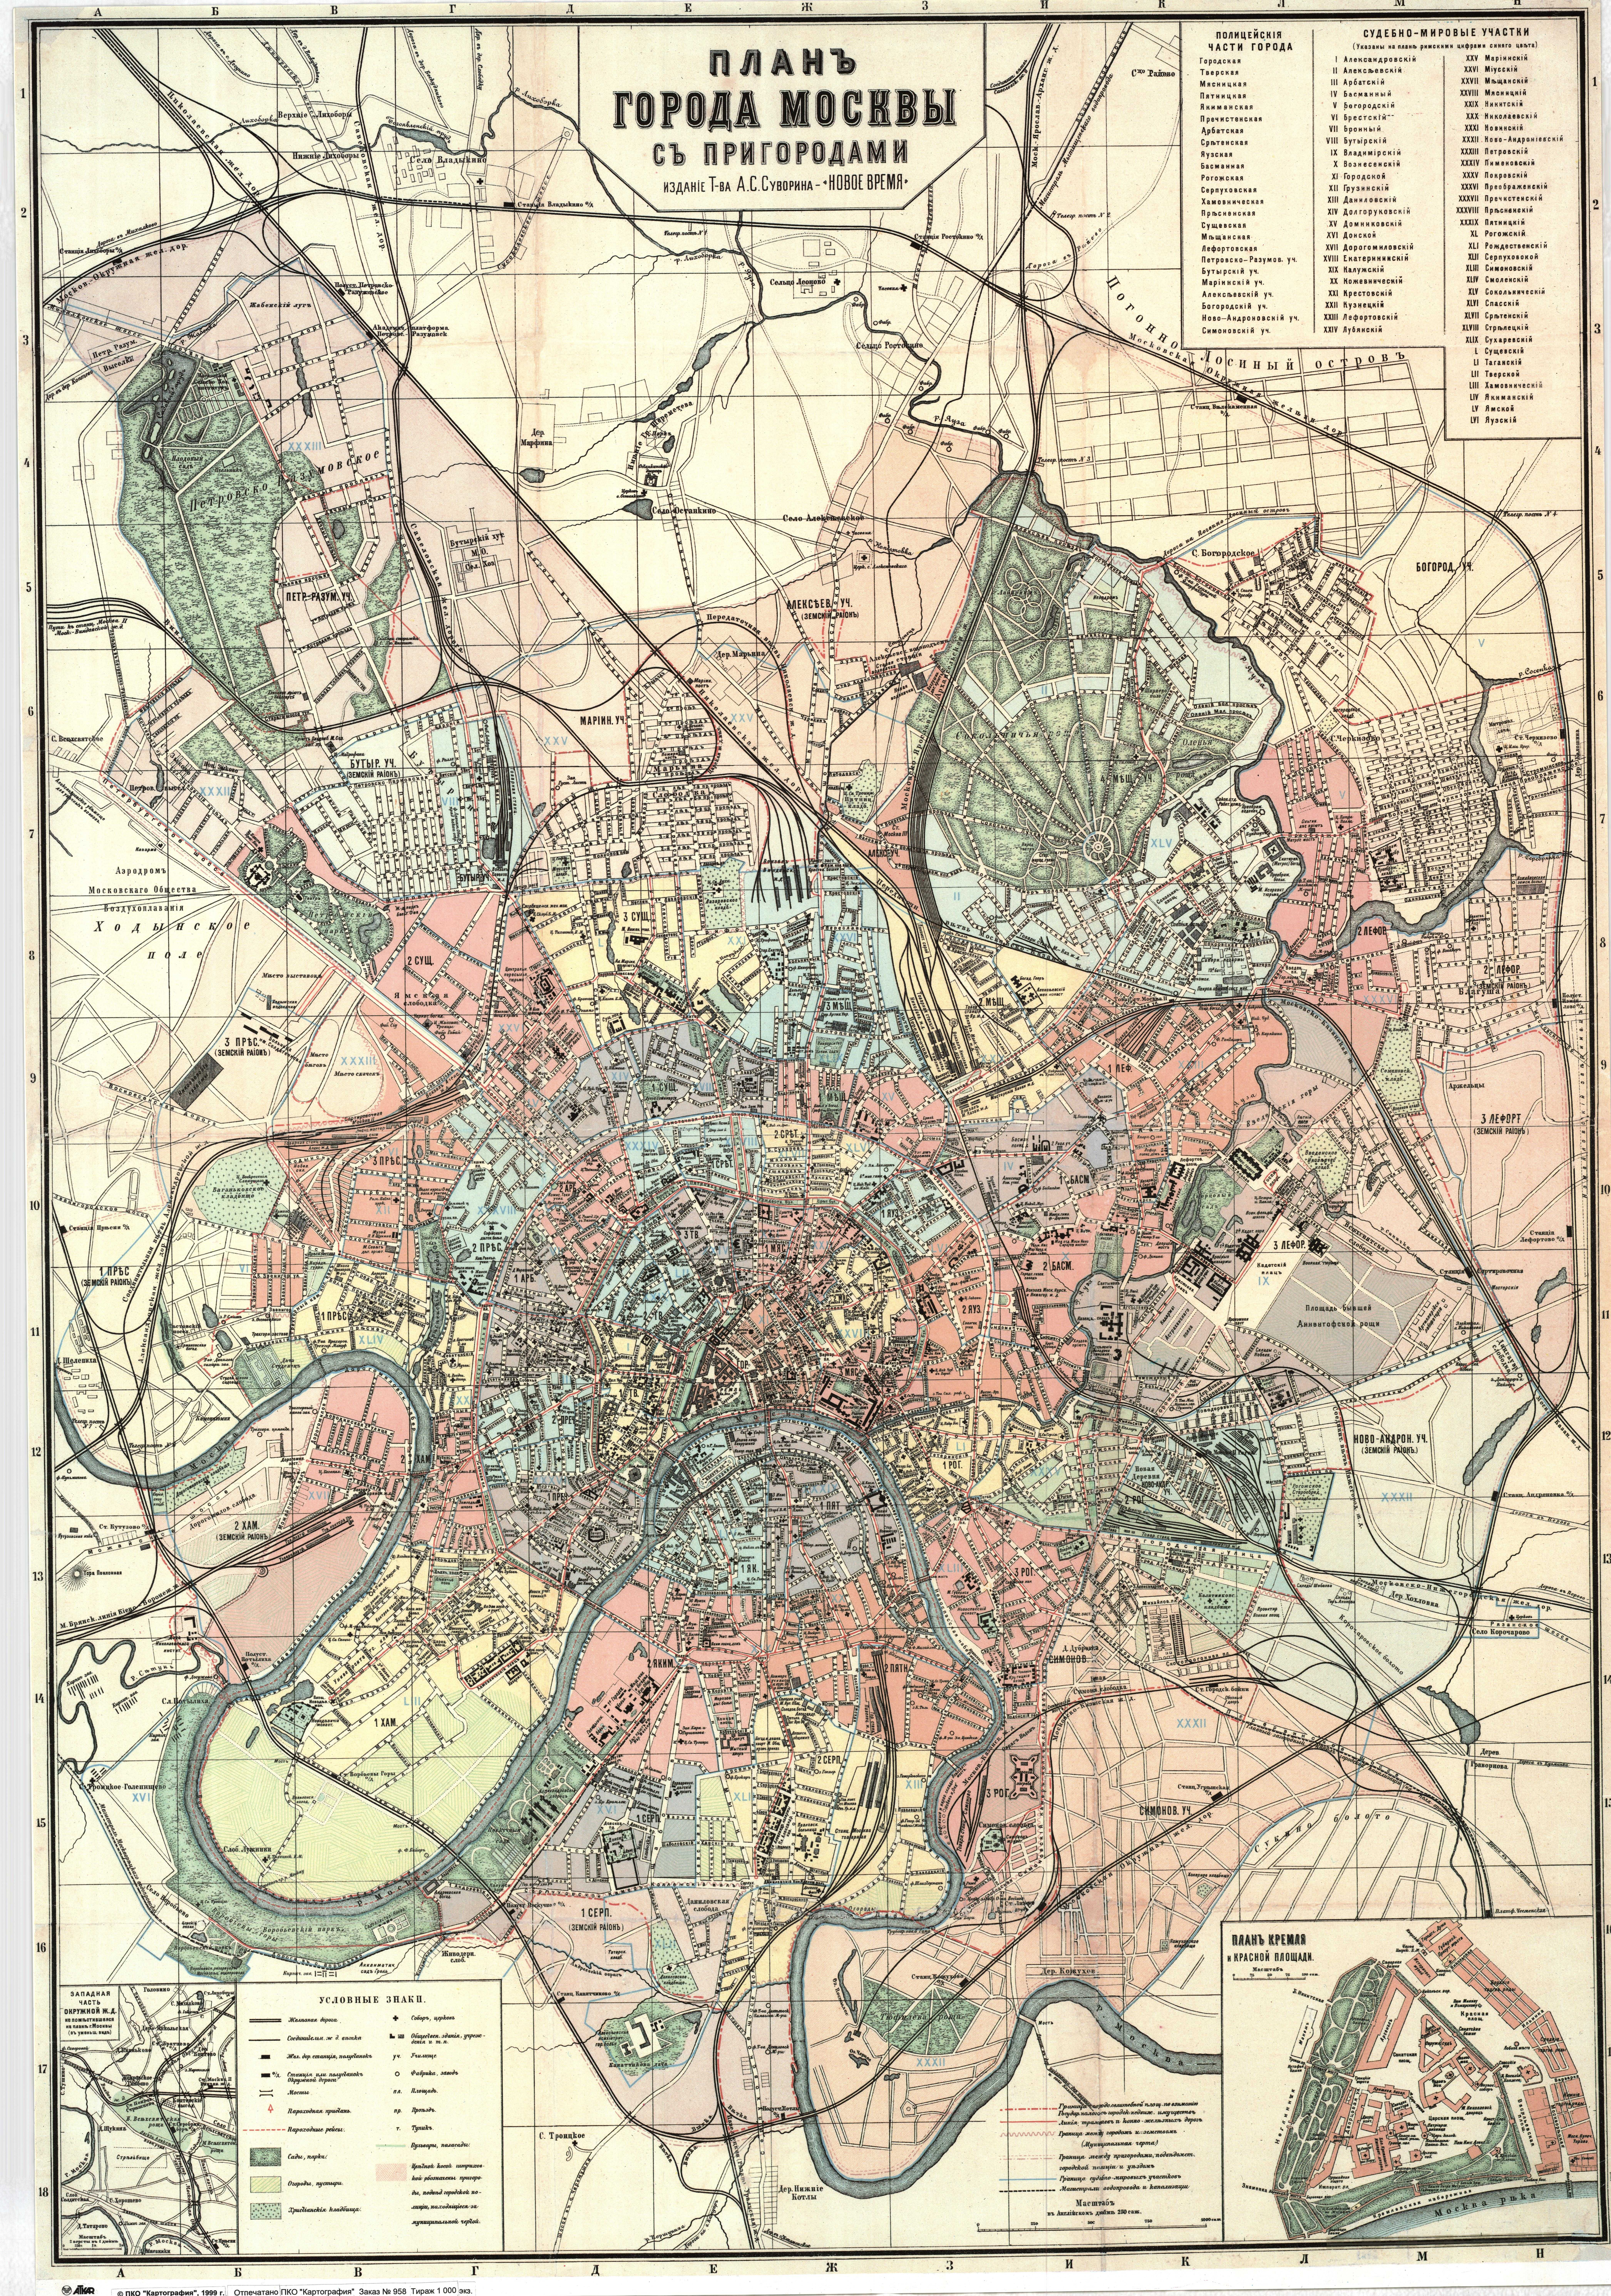 Map of Moscow, 1917